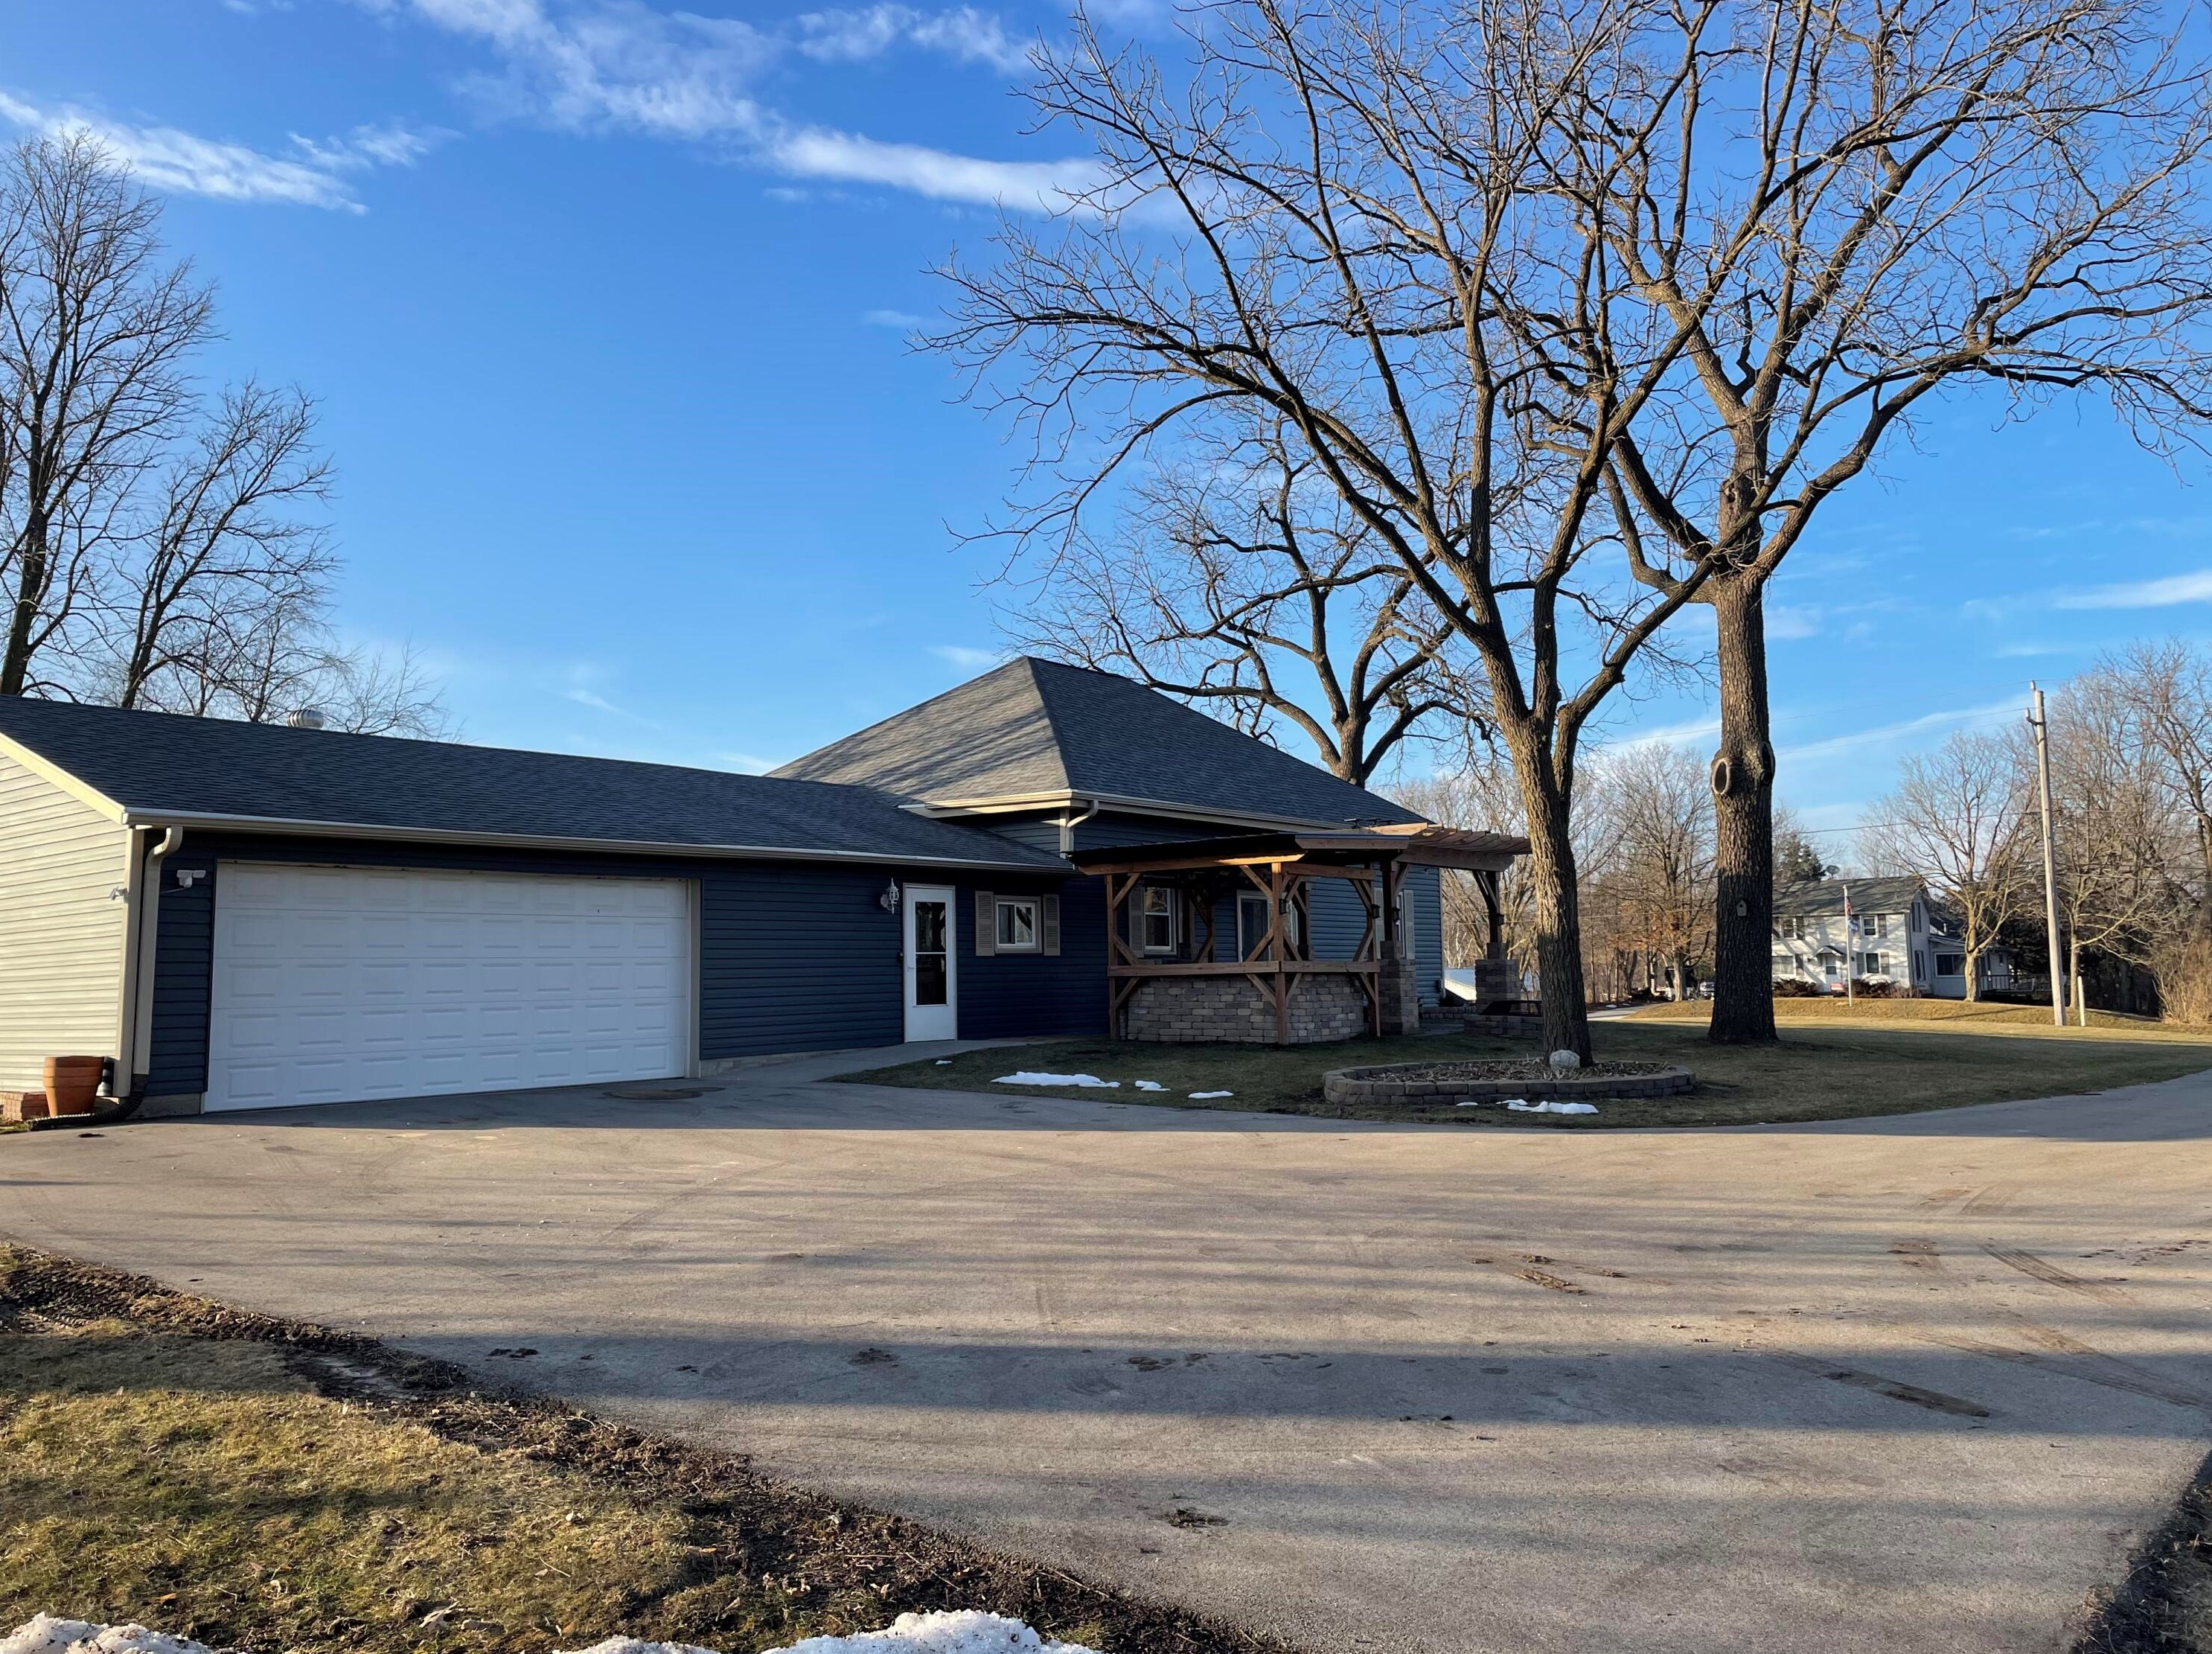 541 E Clay St, Whitewater, WI 53190